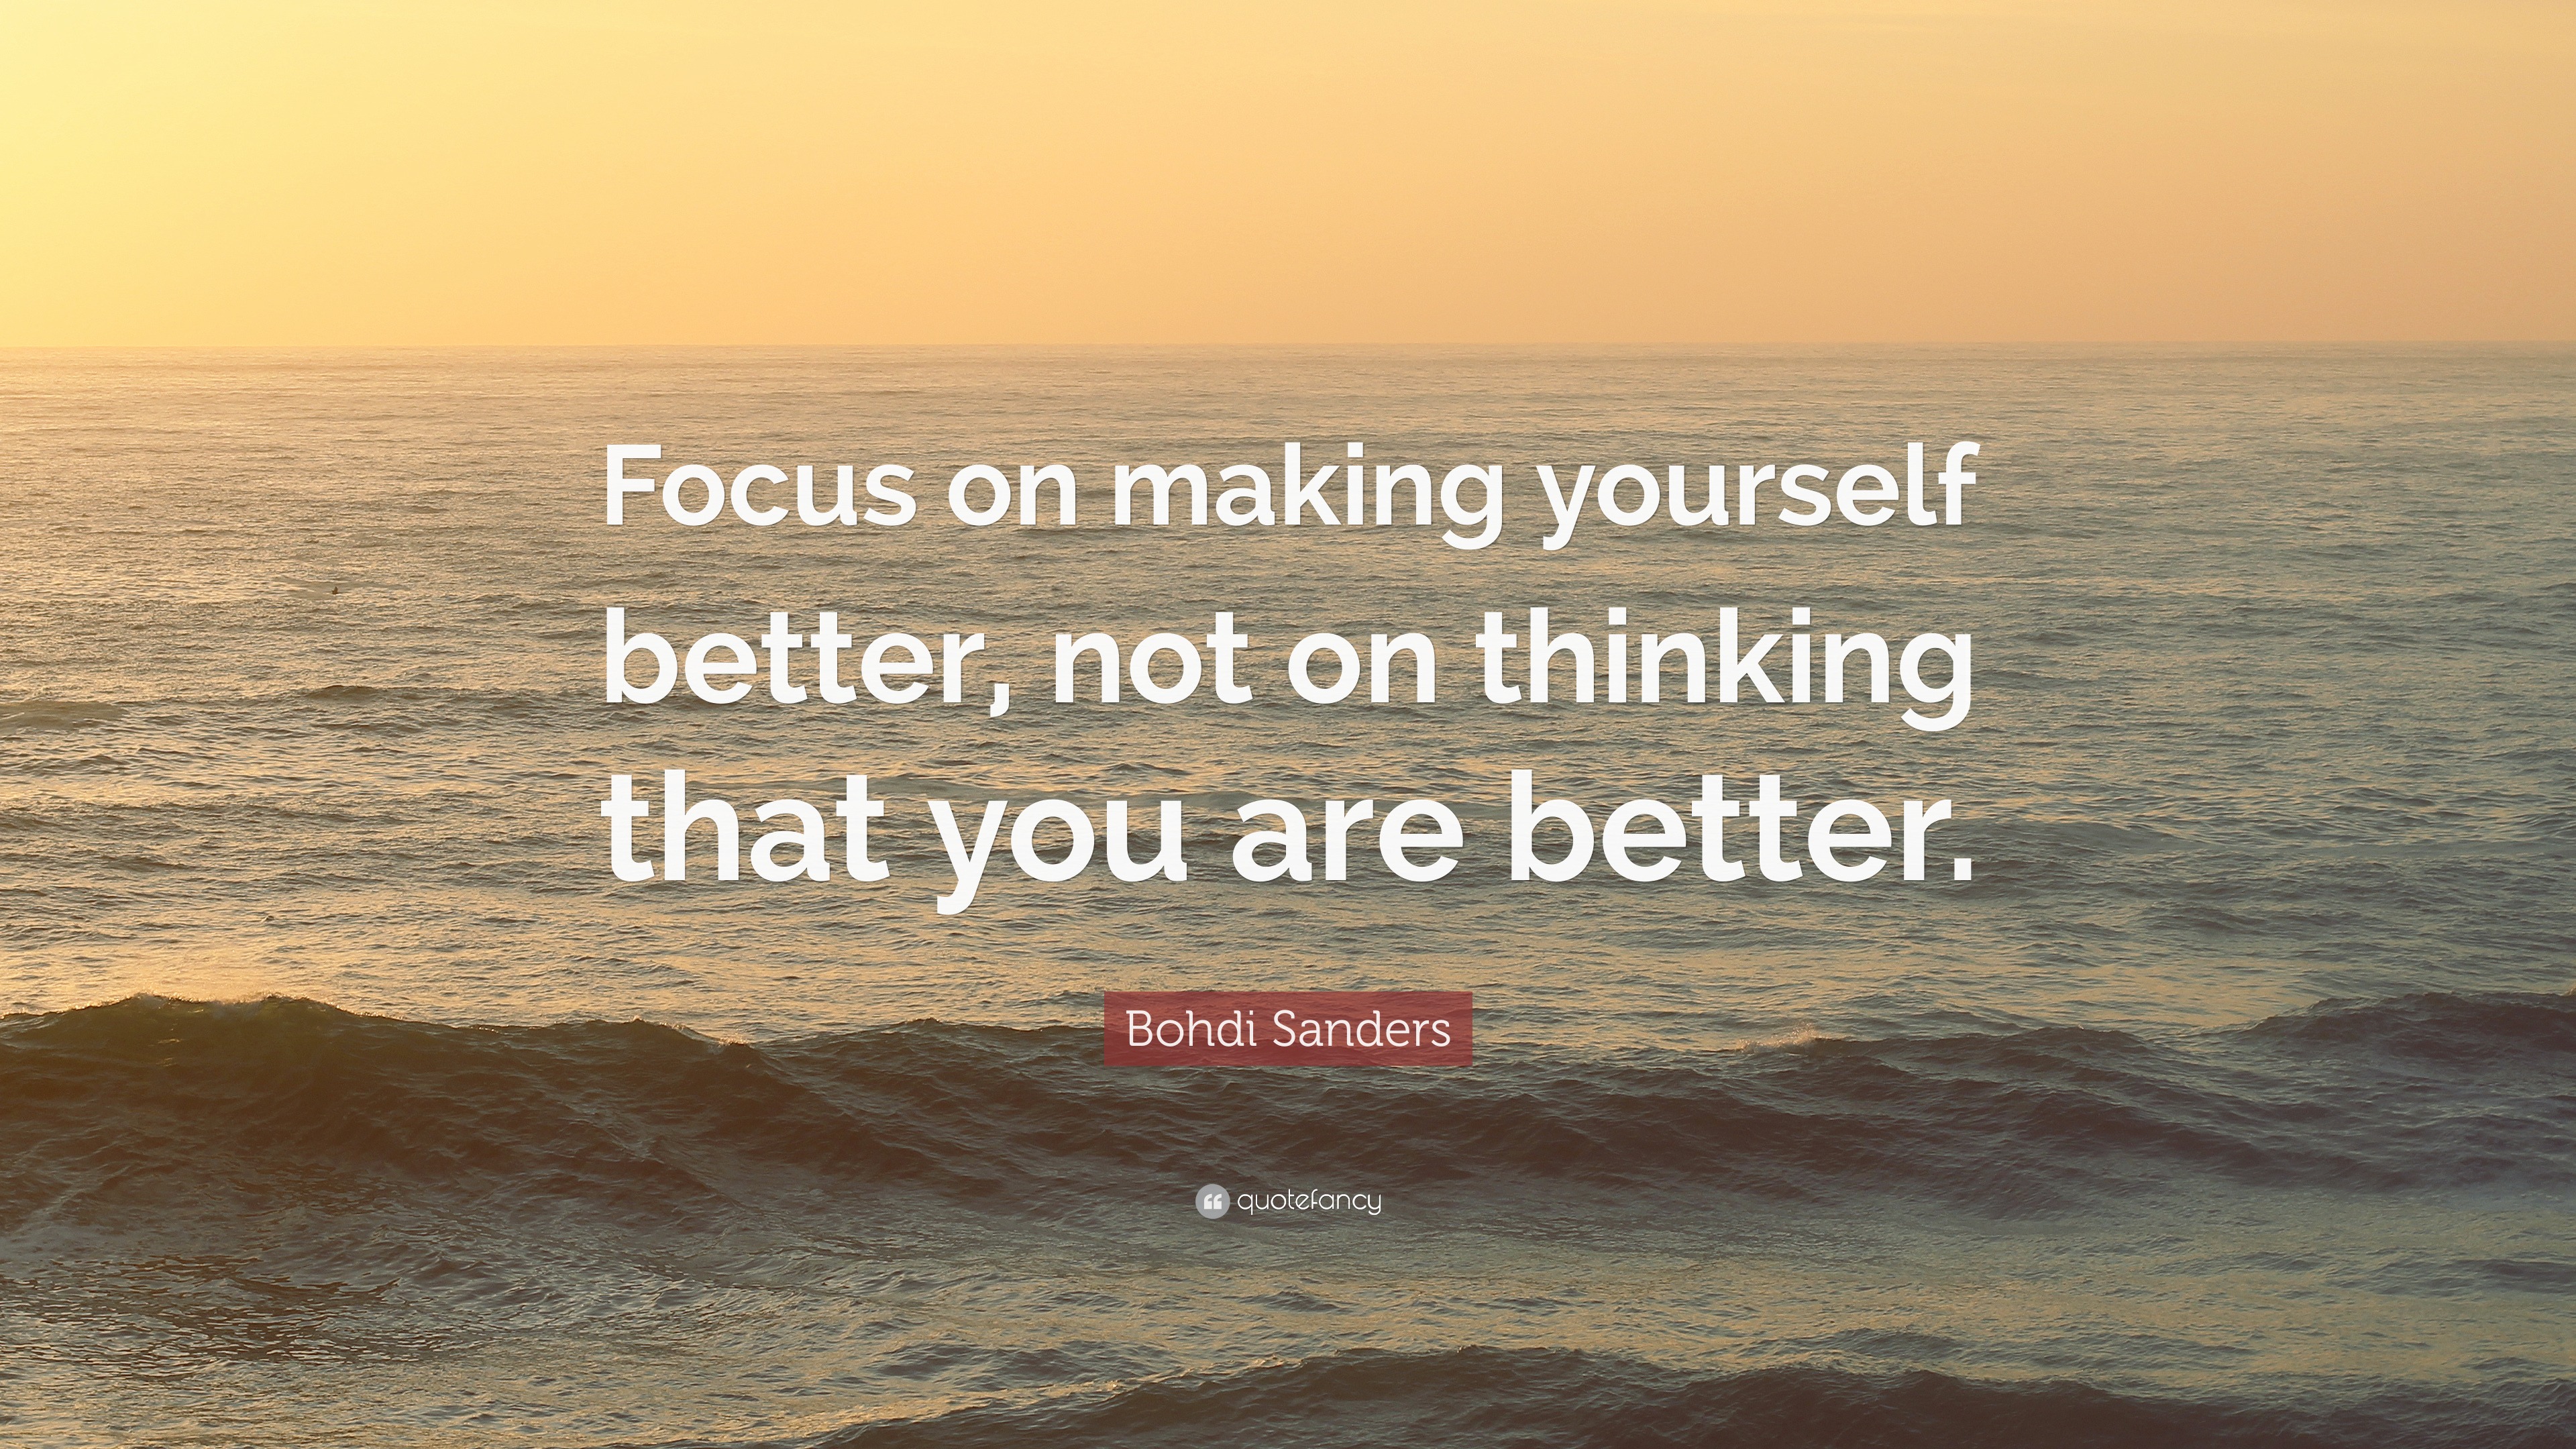 Bohdi Sanders Quote “Focus on making yourself better, not